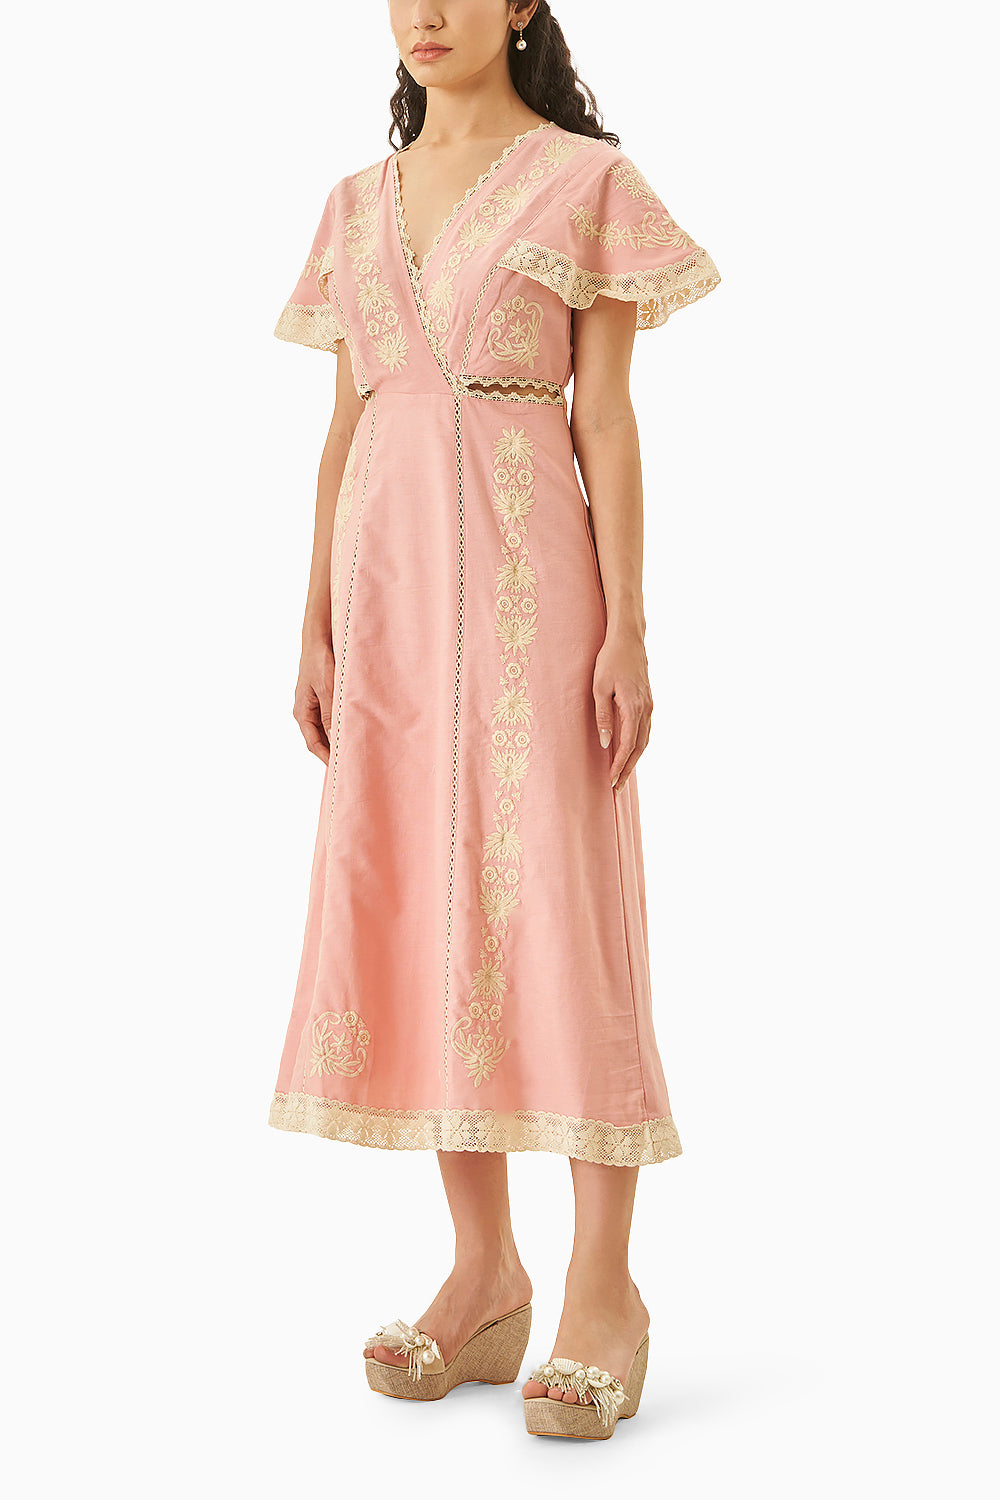 Dainty Pastel Embroidered Dress